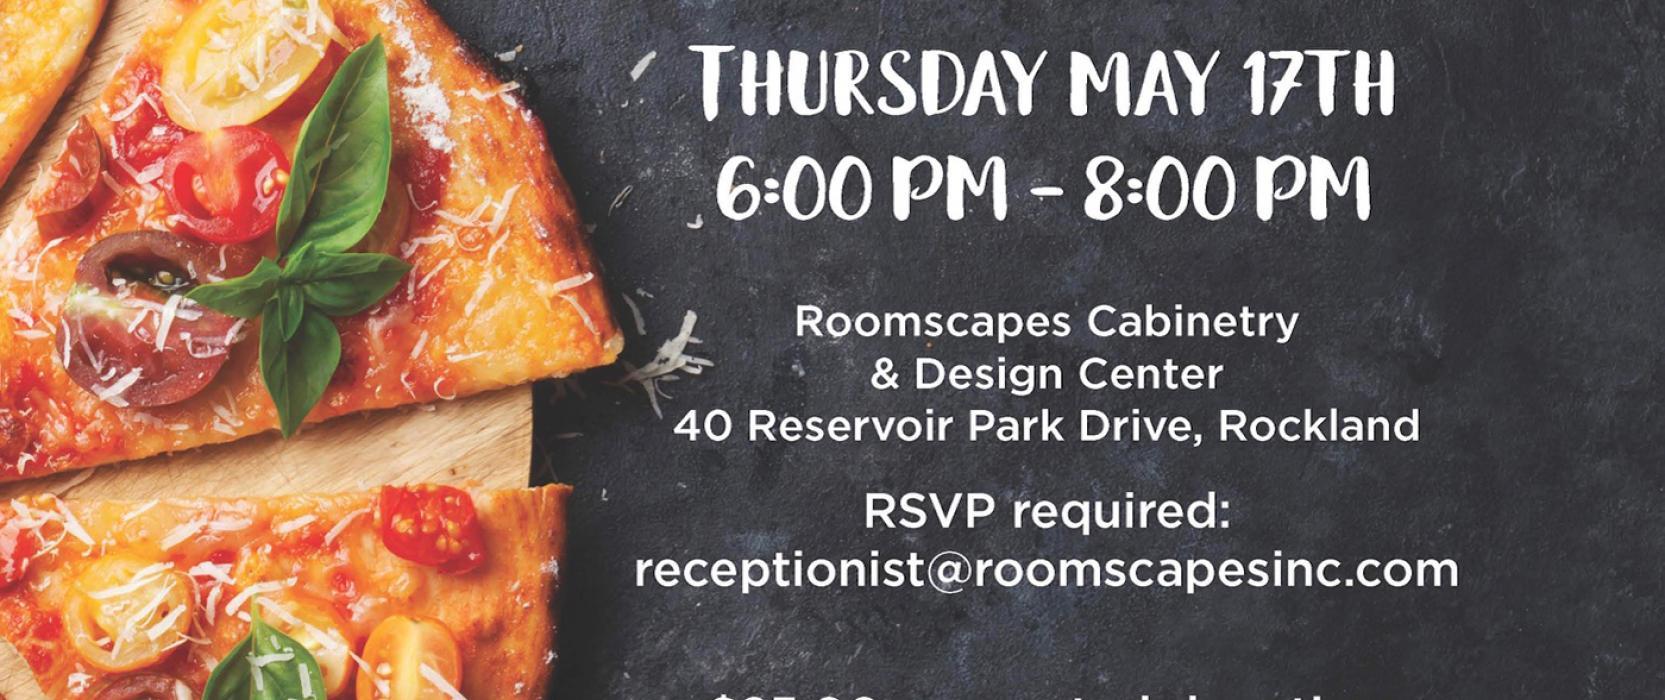 Pizza benefit and cooking demonstration at Roomscapes